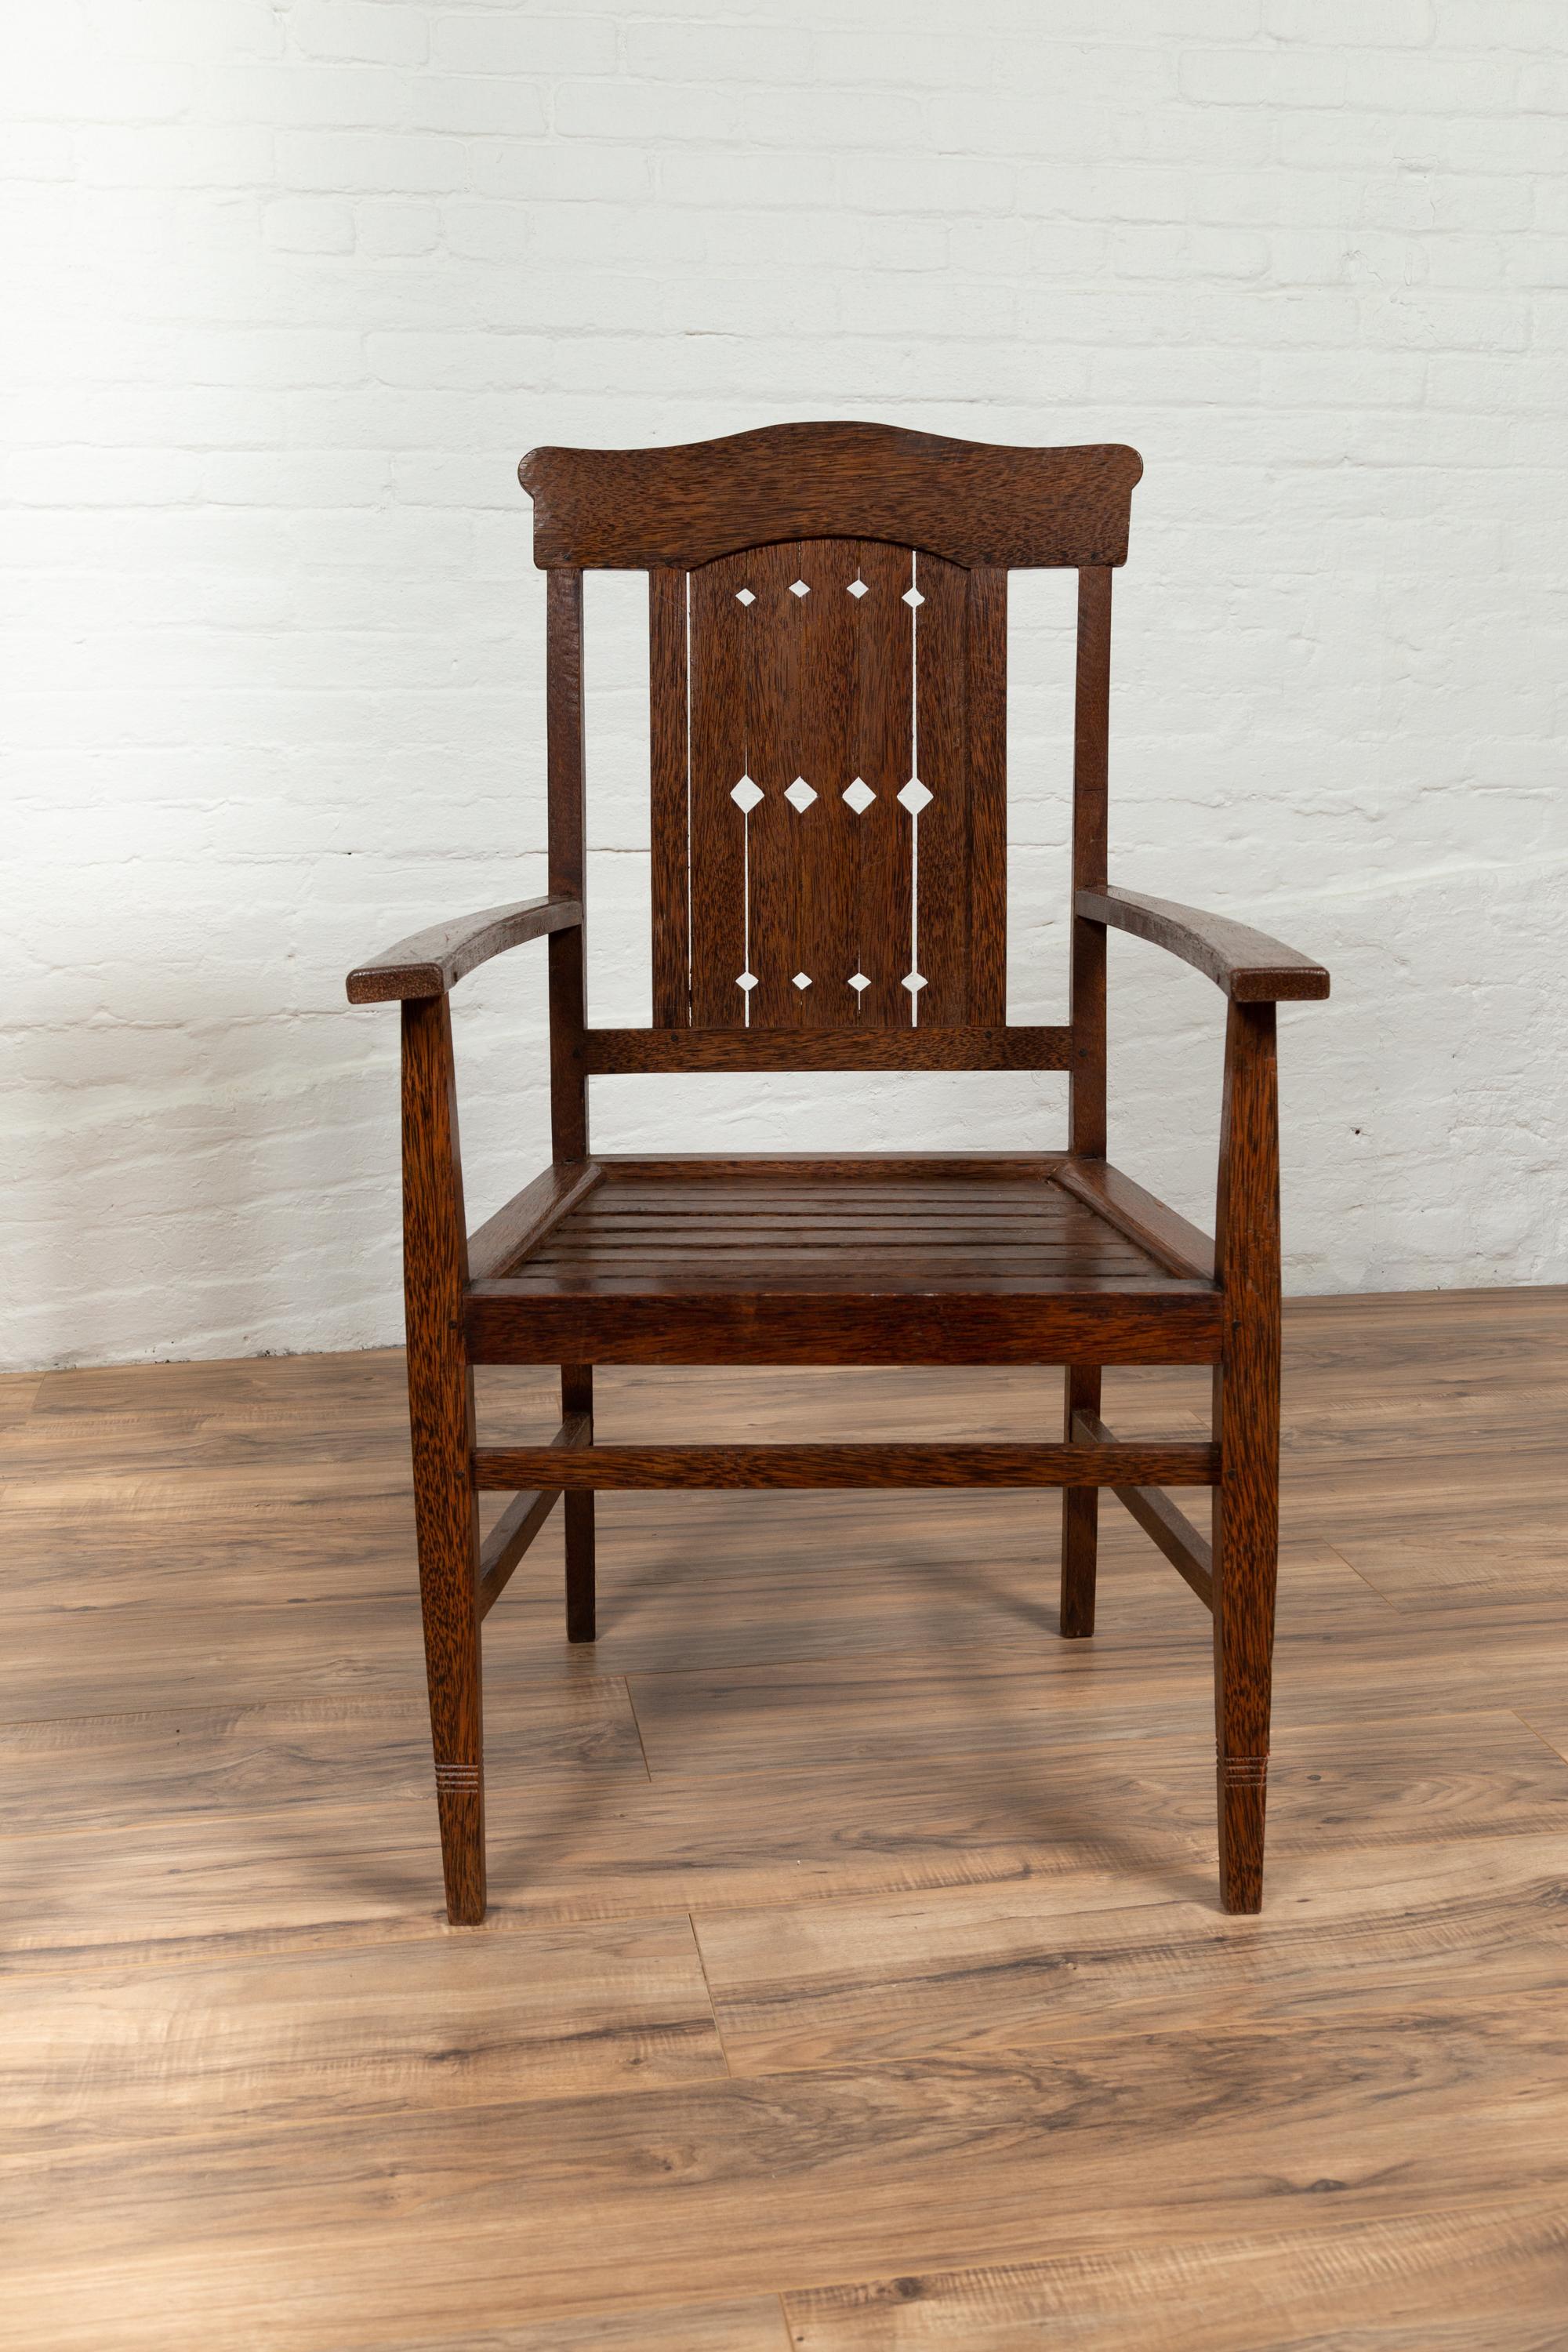 Vintage Dutch Colonial Armchair with Pierced Wooden Slats and Bonnet-Style Rail For Sale 3